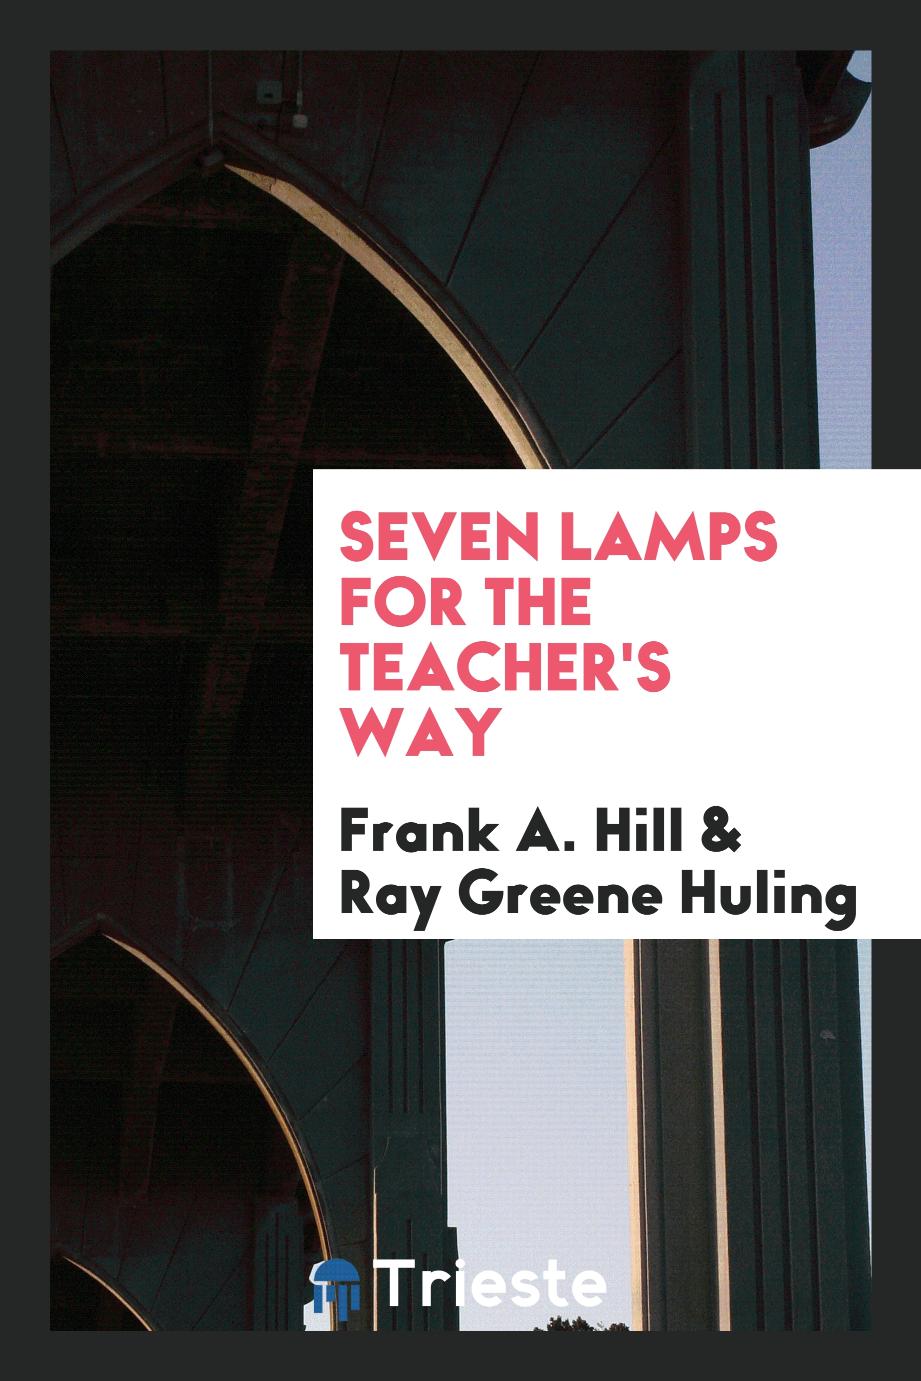 Seven lamps for the teacher's way